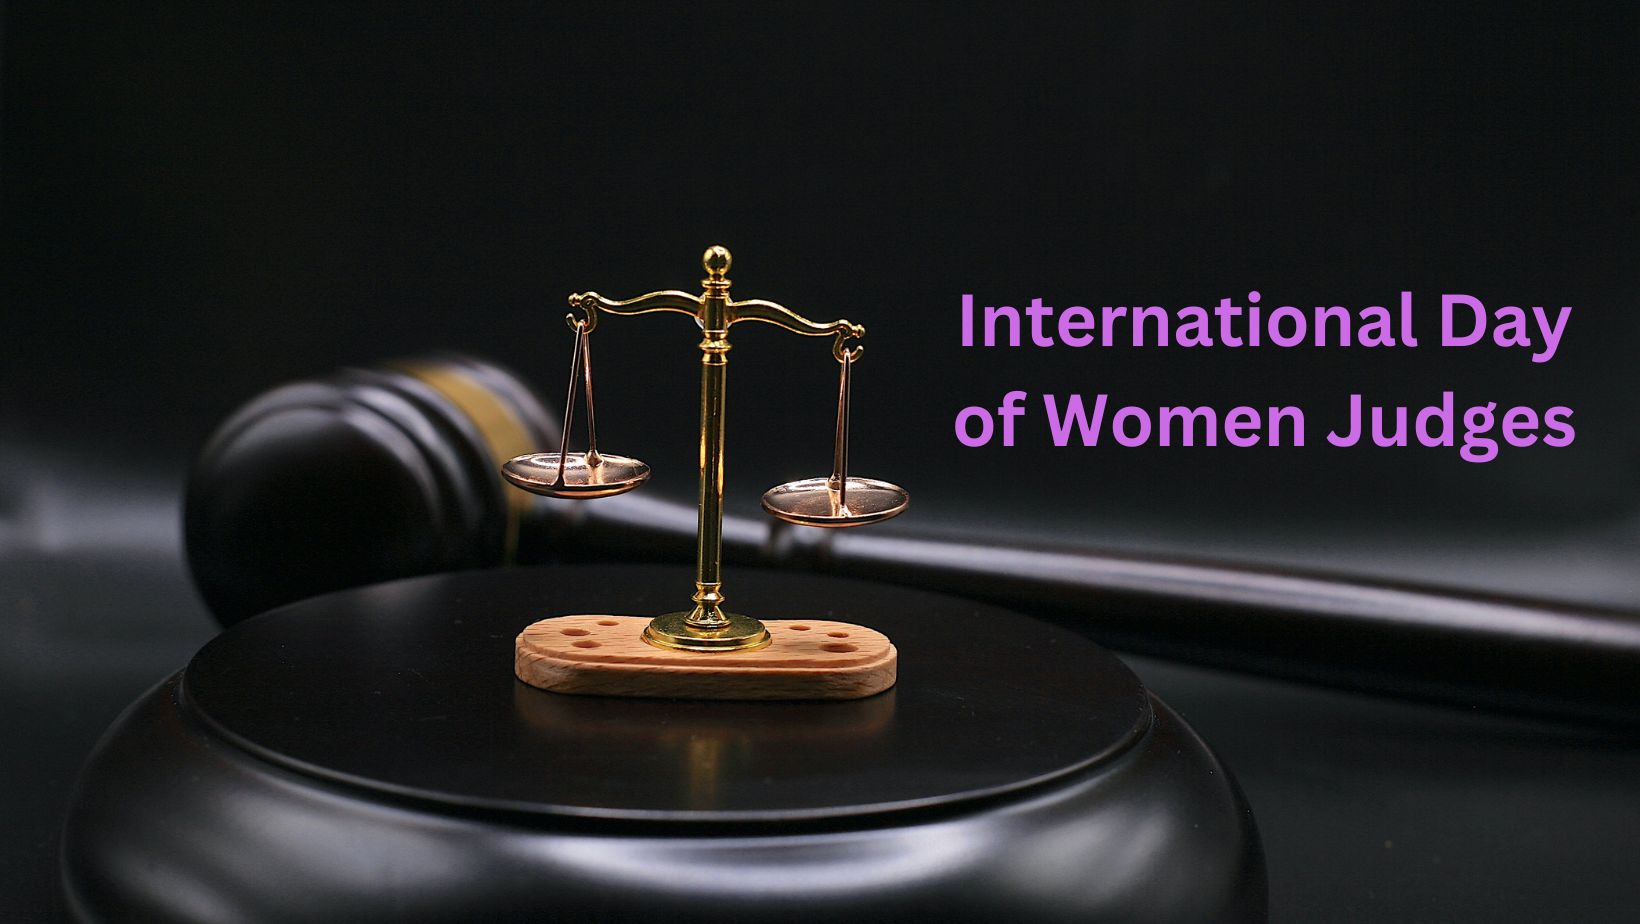 Women Judges Play a Significant Role to the Quality of Justice